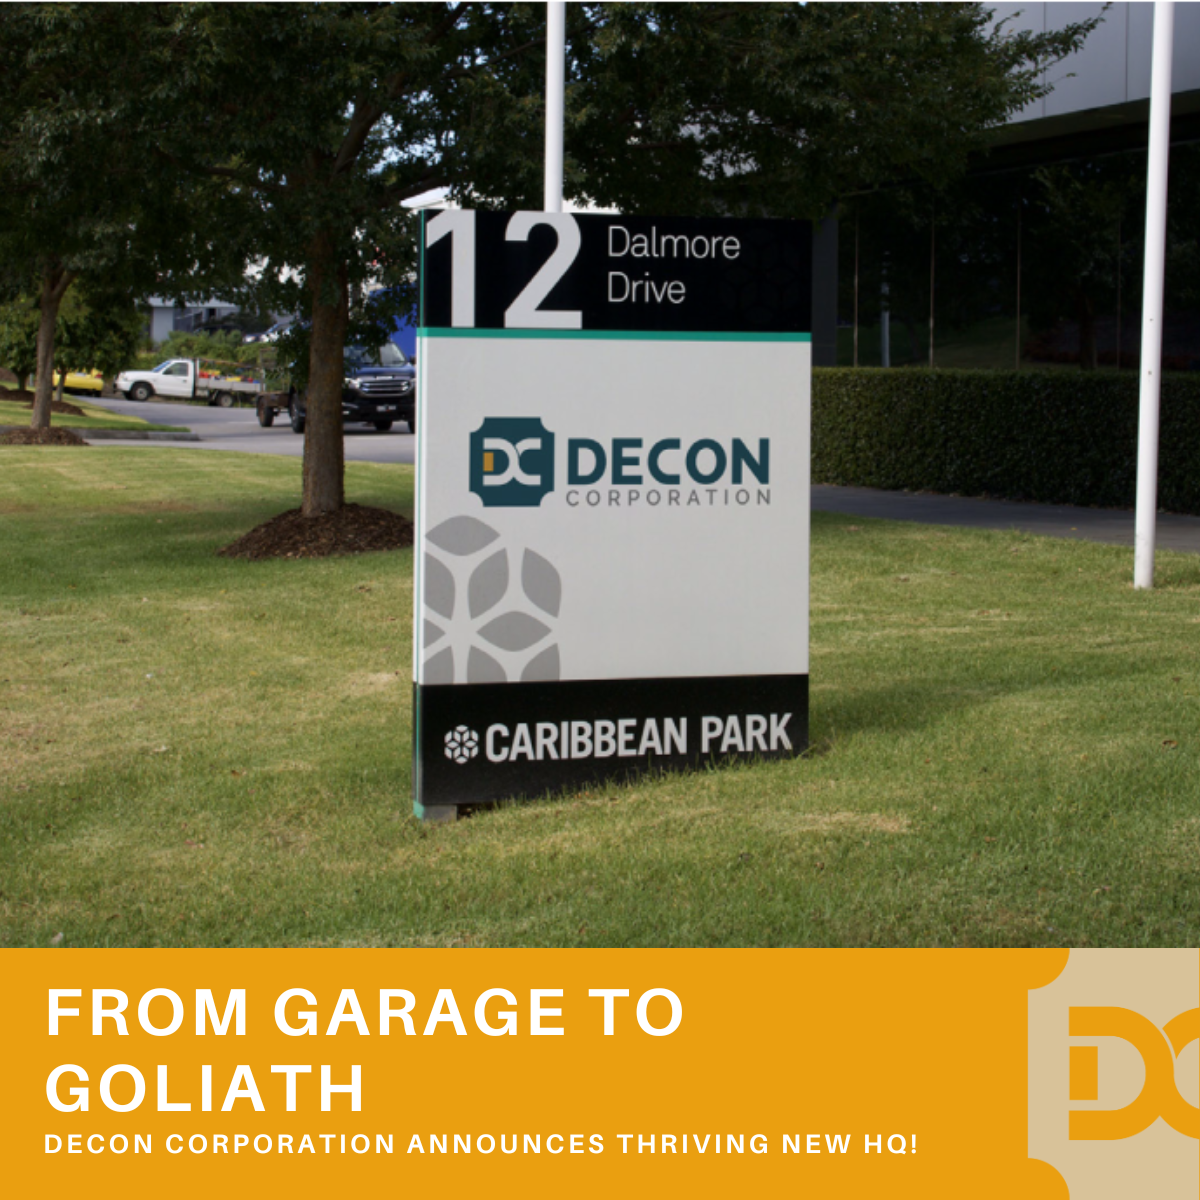 From Garage to Goliath: Decon Corporation Announces Thriving New HQ!